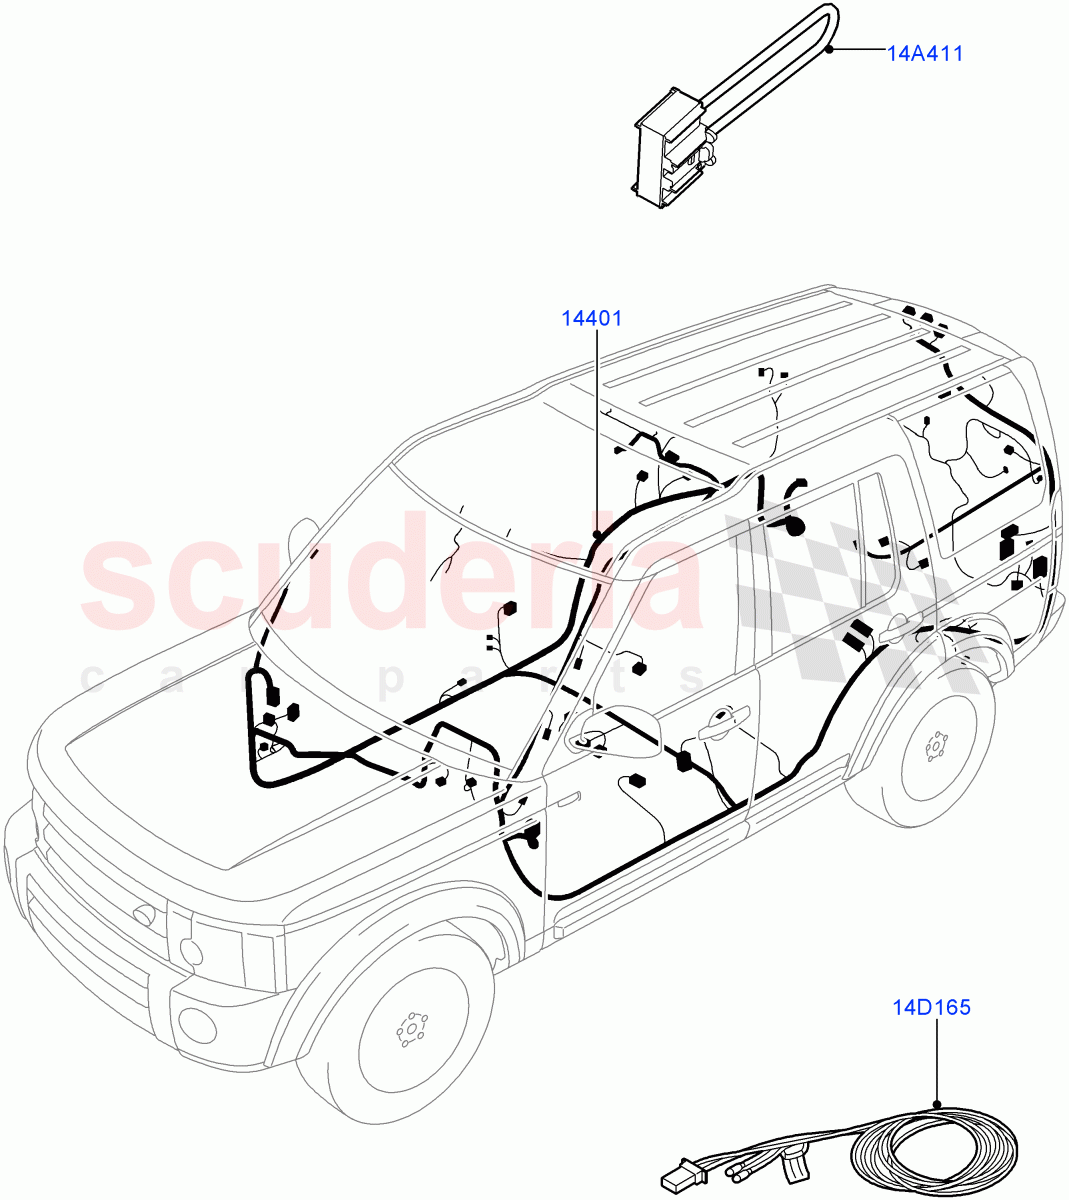 Electrical Wiring - Engine And Dash(Main Harness)((V)FROMAA000001,(V)TOAA999999) of Land Rover Land Rover Discovery 4 (2010-2016) [2.7 Diesel V6]